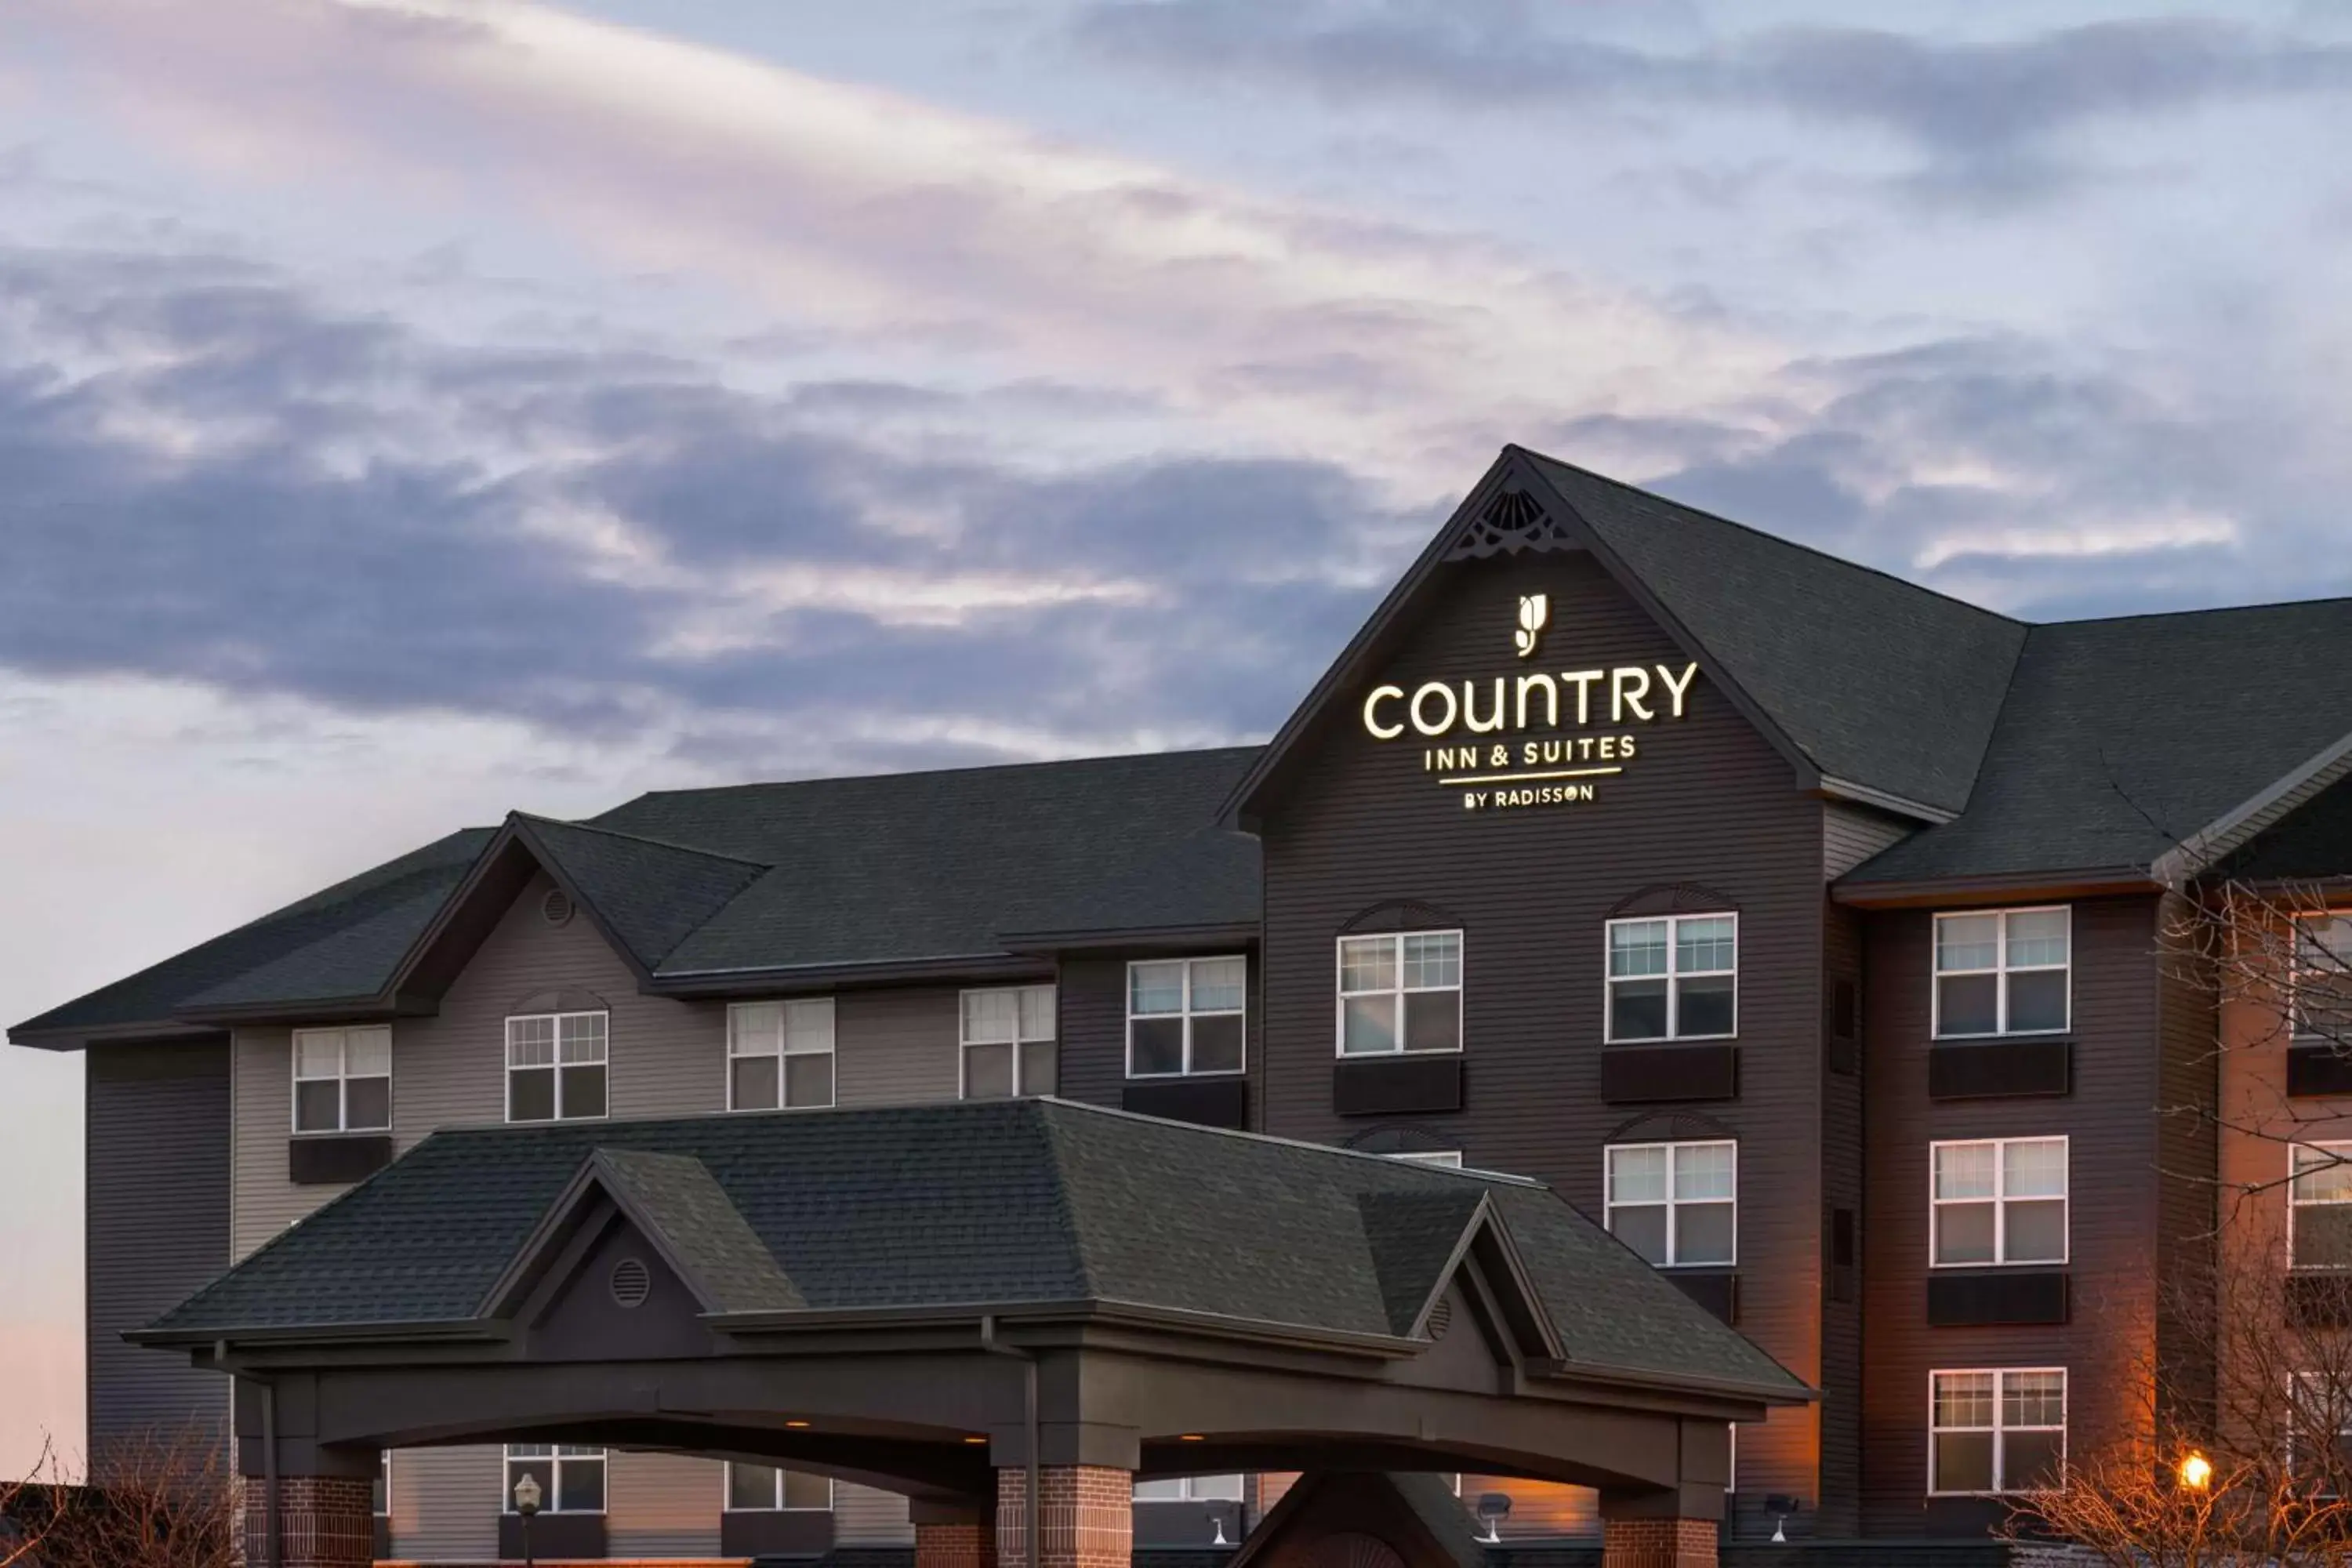 Property Building in Country Inn & Suites by Radisson, Boise West, ID